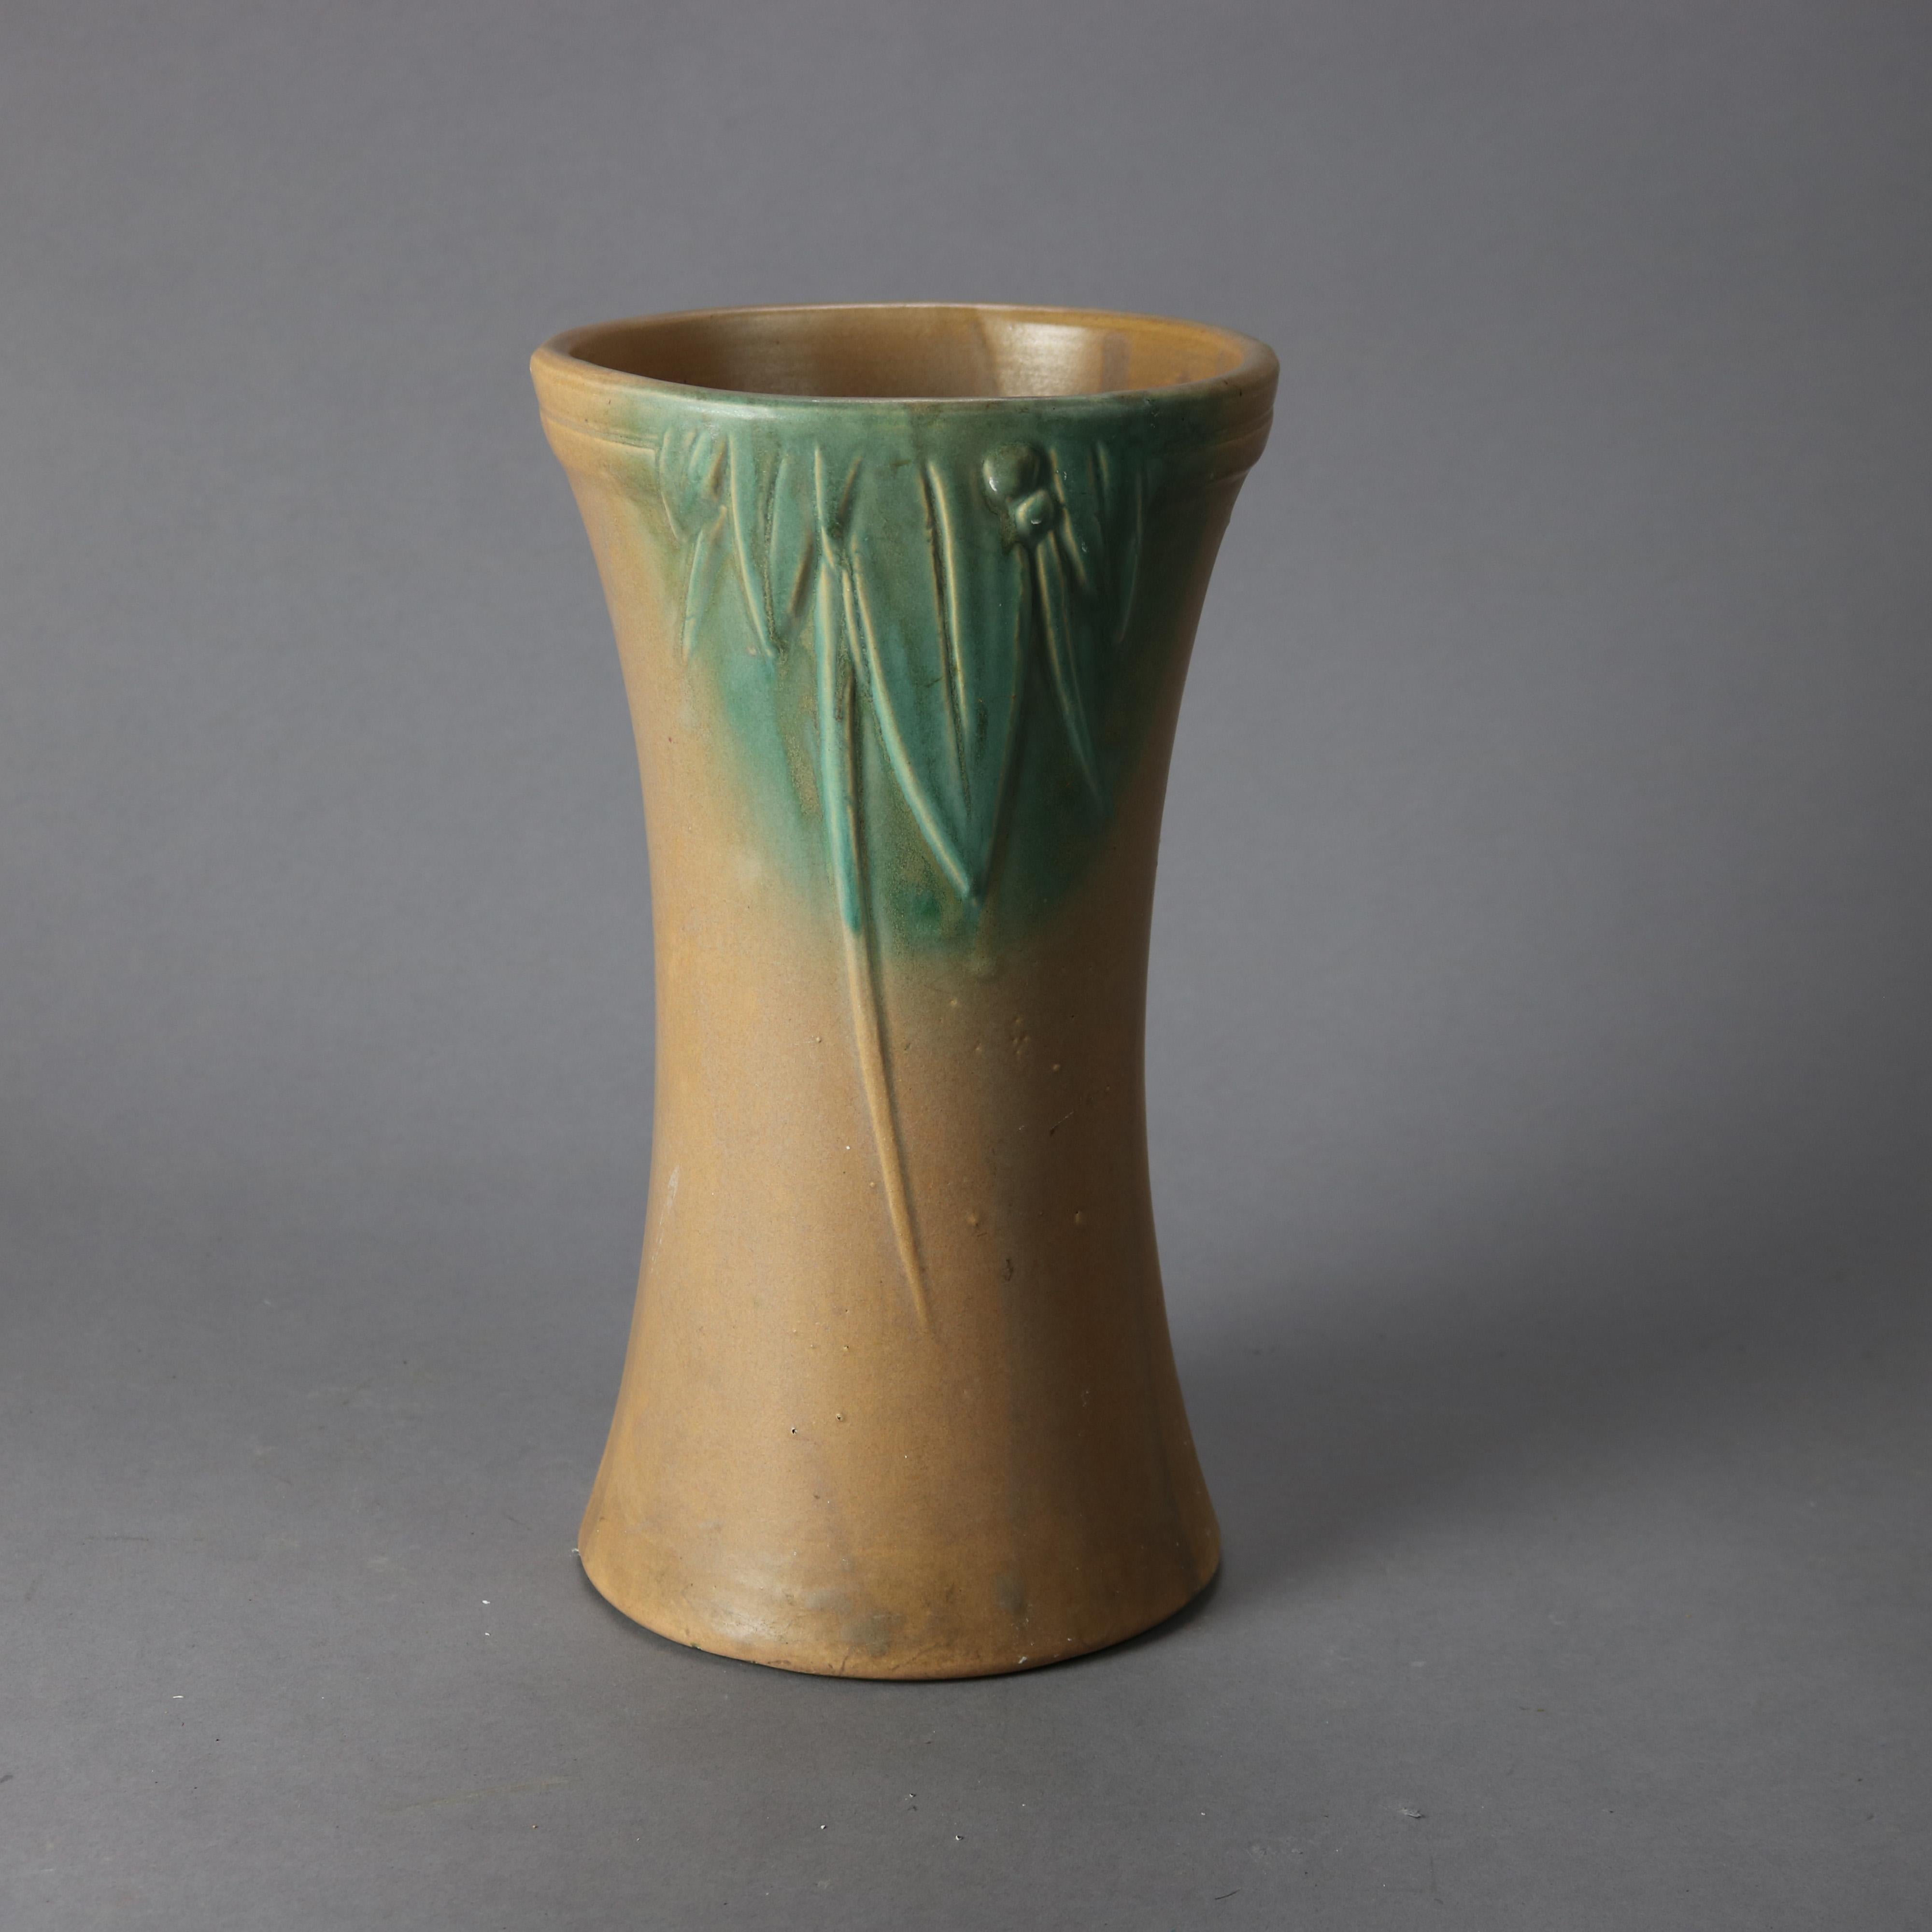 An antique McCoy vase offers art pottery construction with leaf and berry design, circa 1930

Measures - 12.5